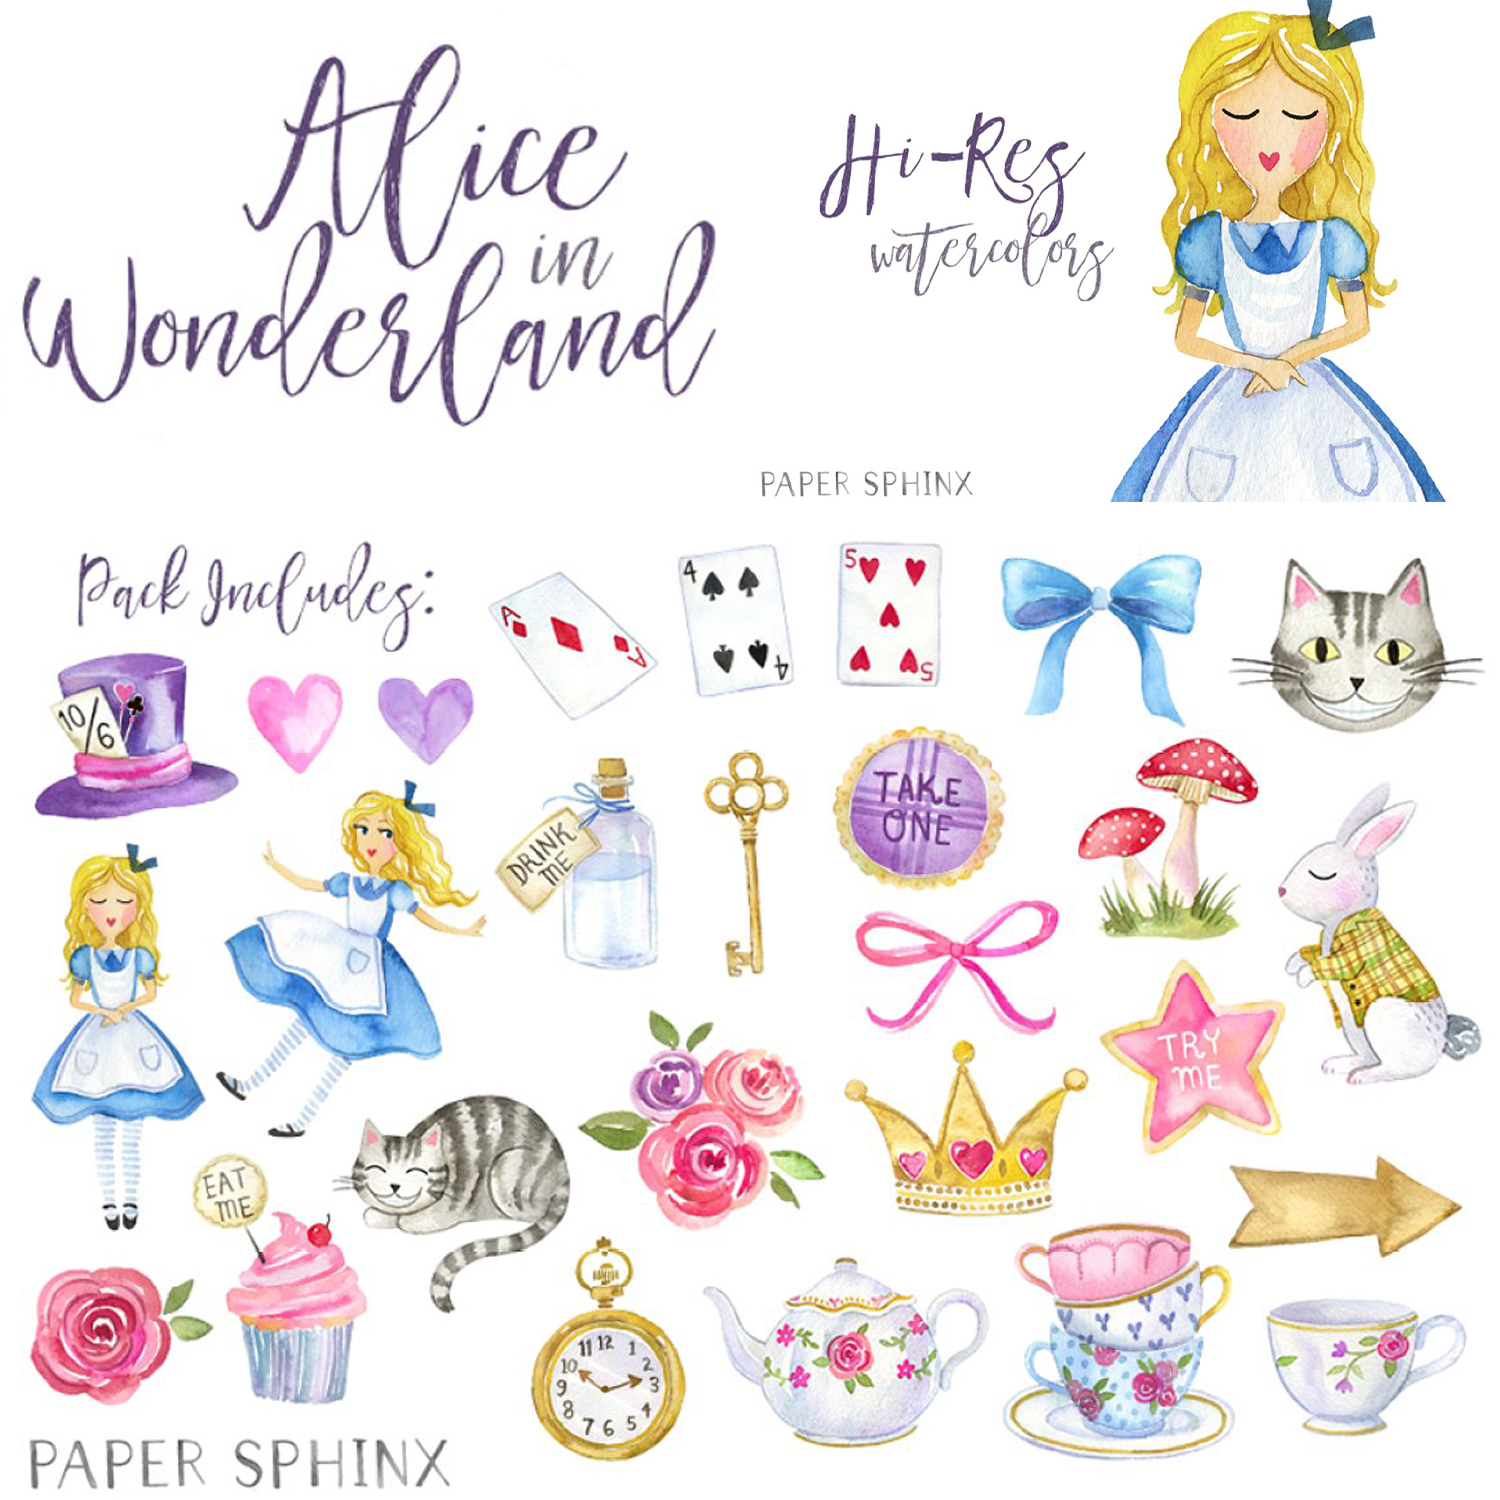 Preview alice in wonderland clipart set.